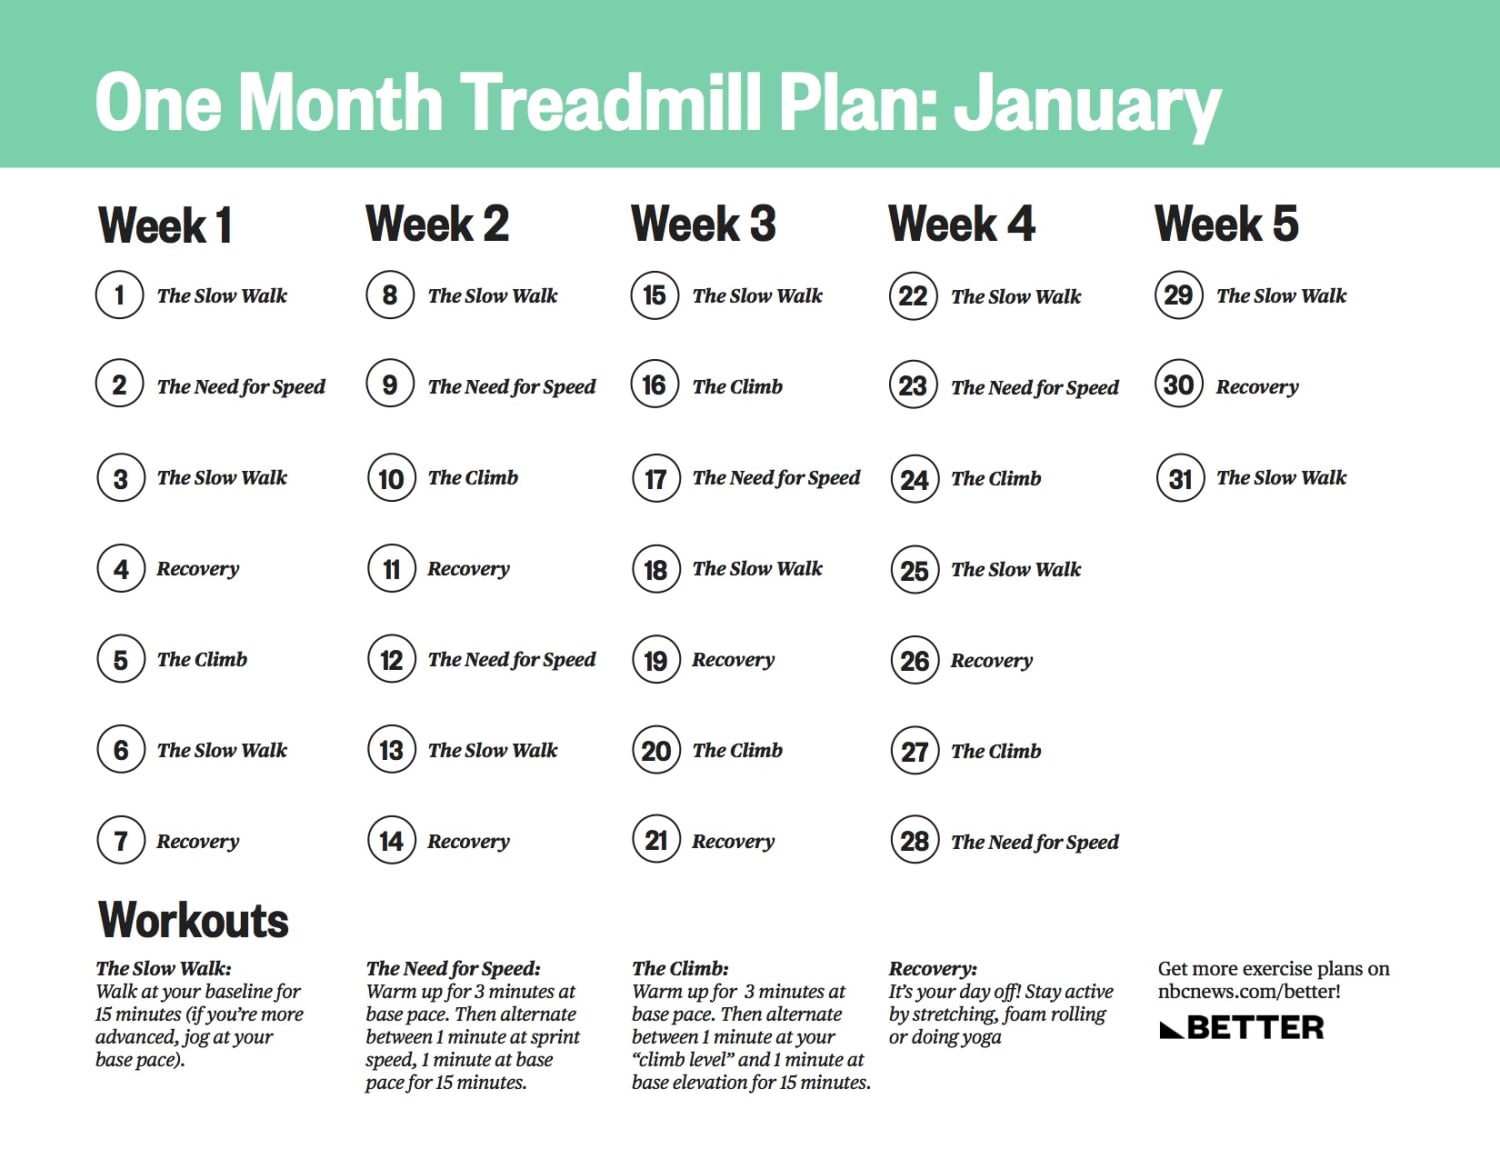 How to Lose Weight on a Treadmill in a Month: Exercise & Diet Tips